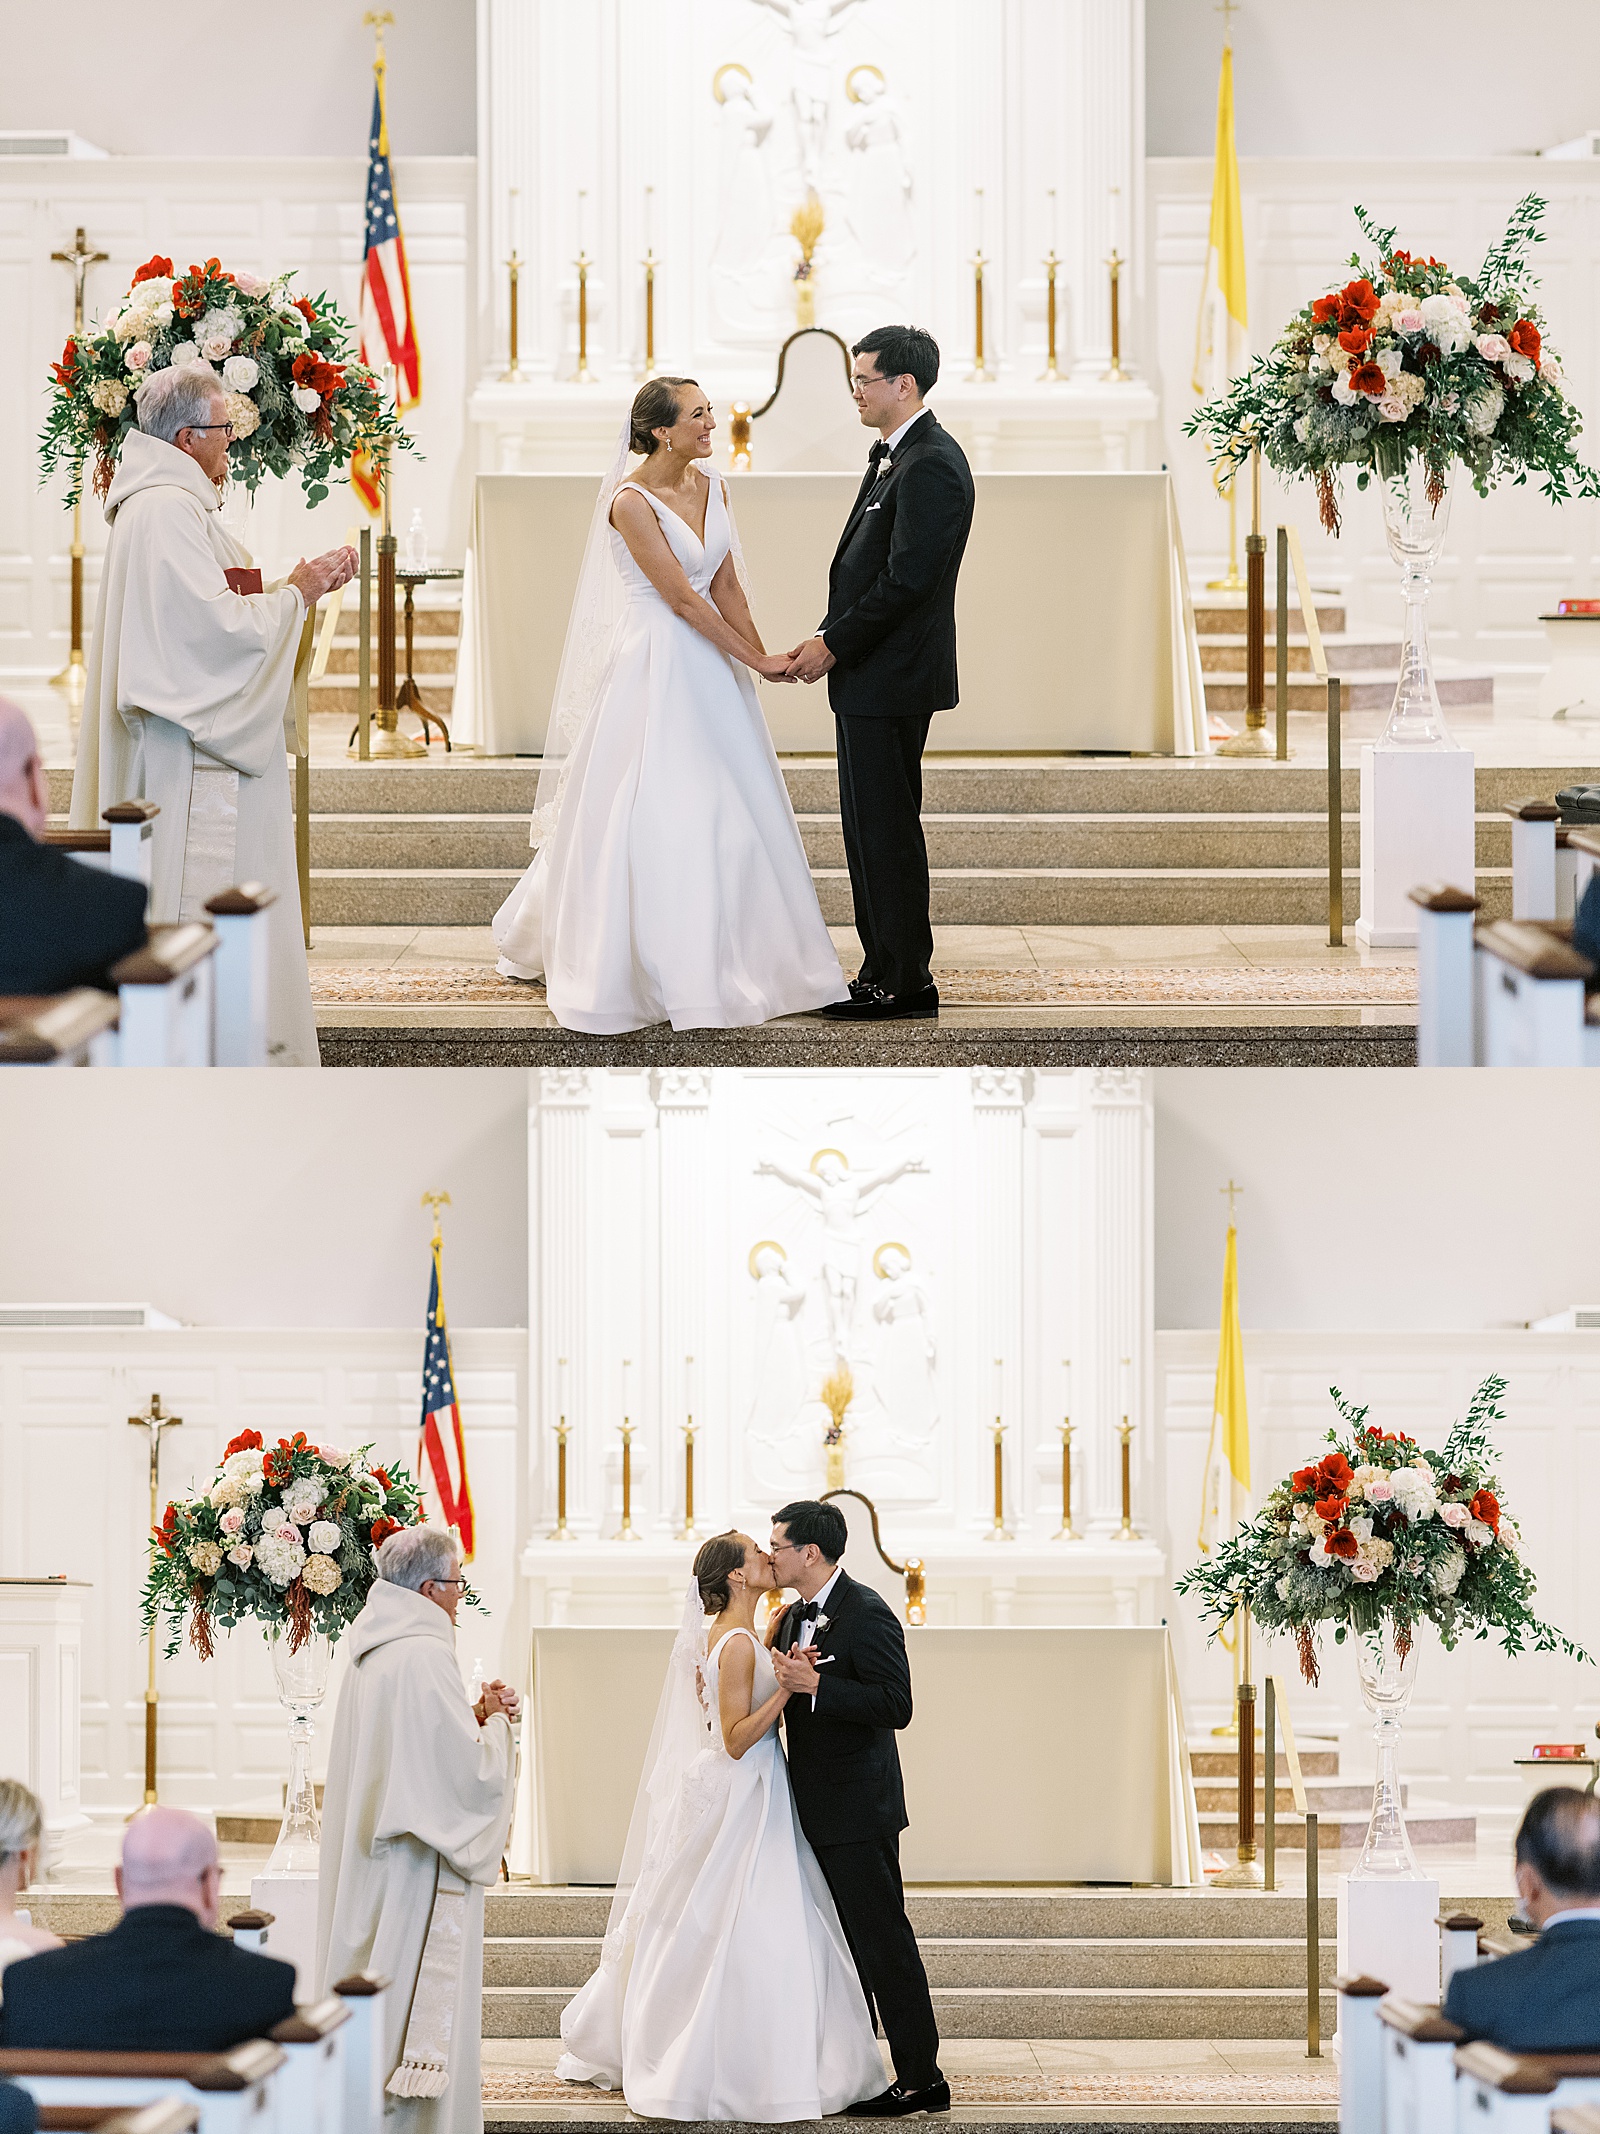 Bride and groom sharing a first kiss at the alter at their wedding in a church in Lexington.